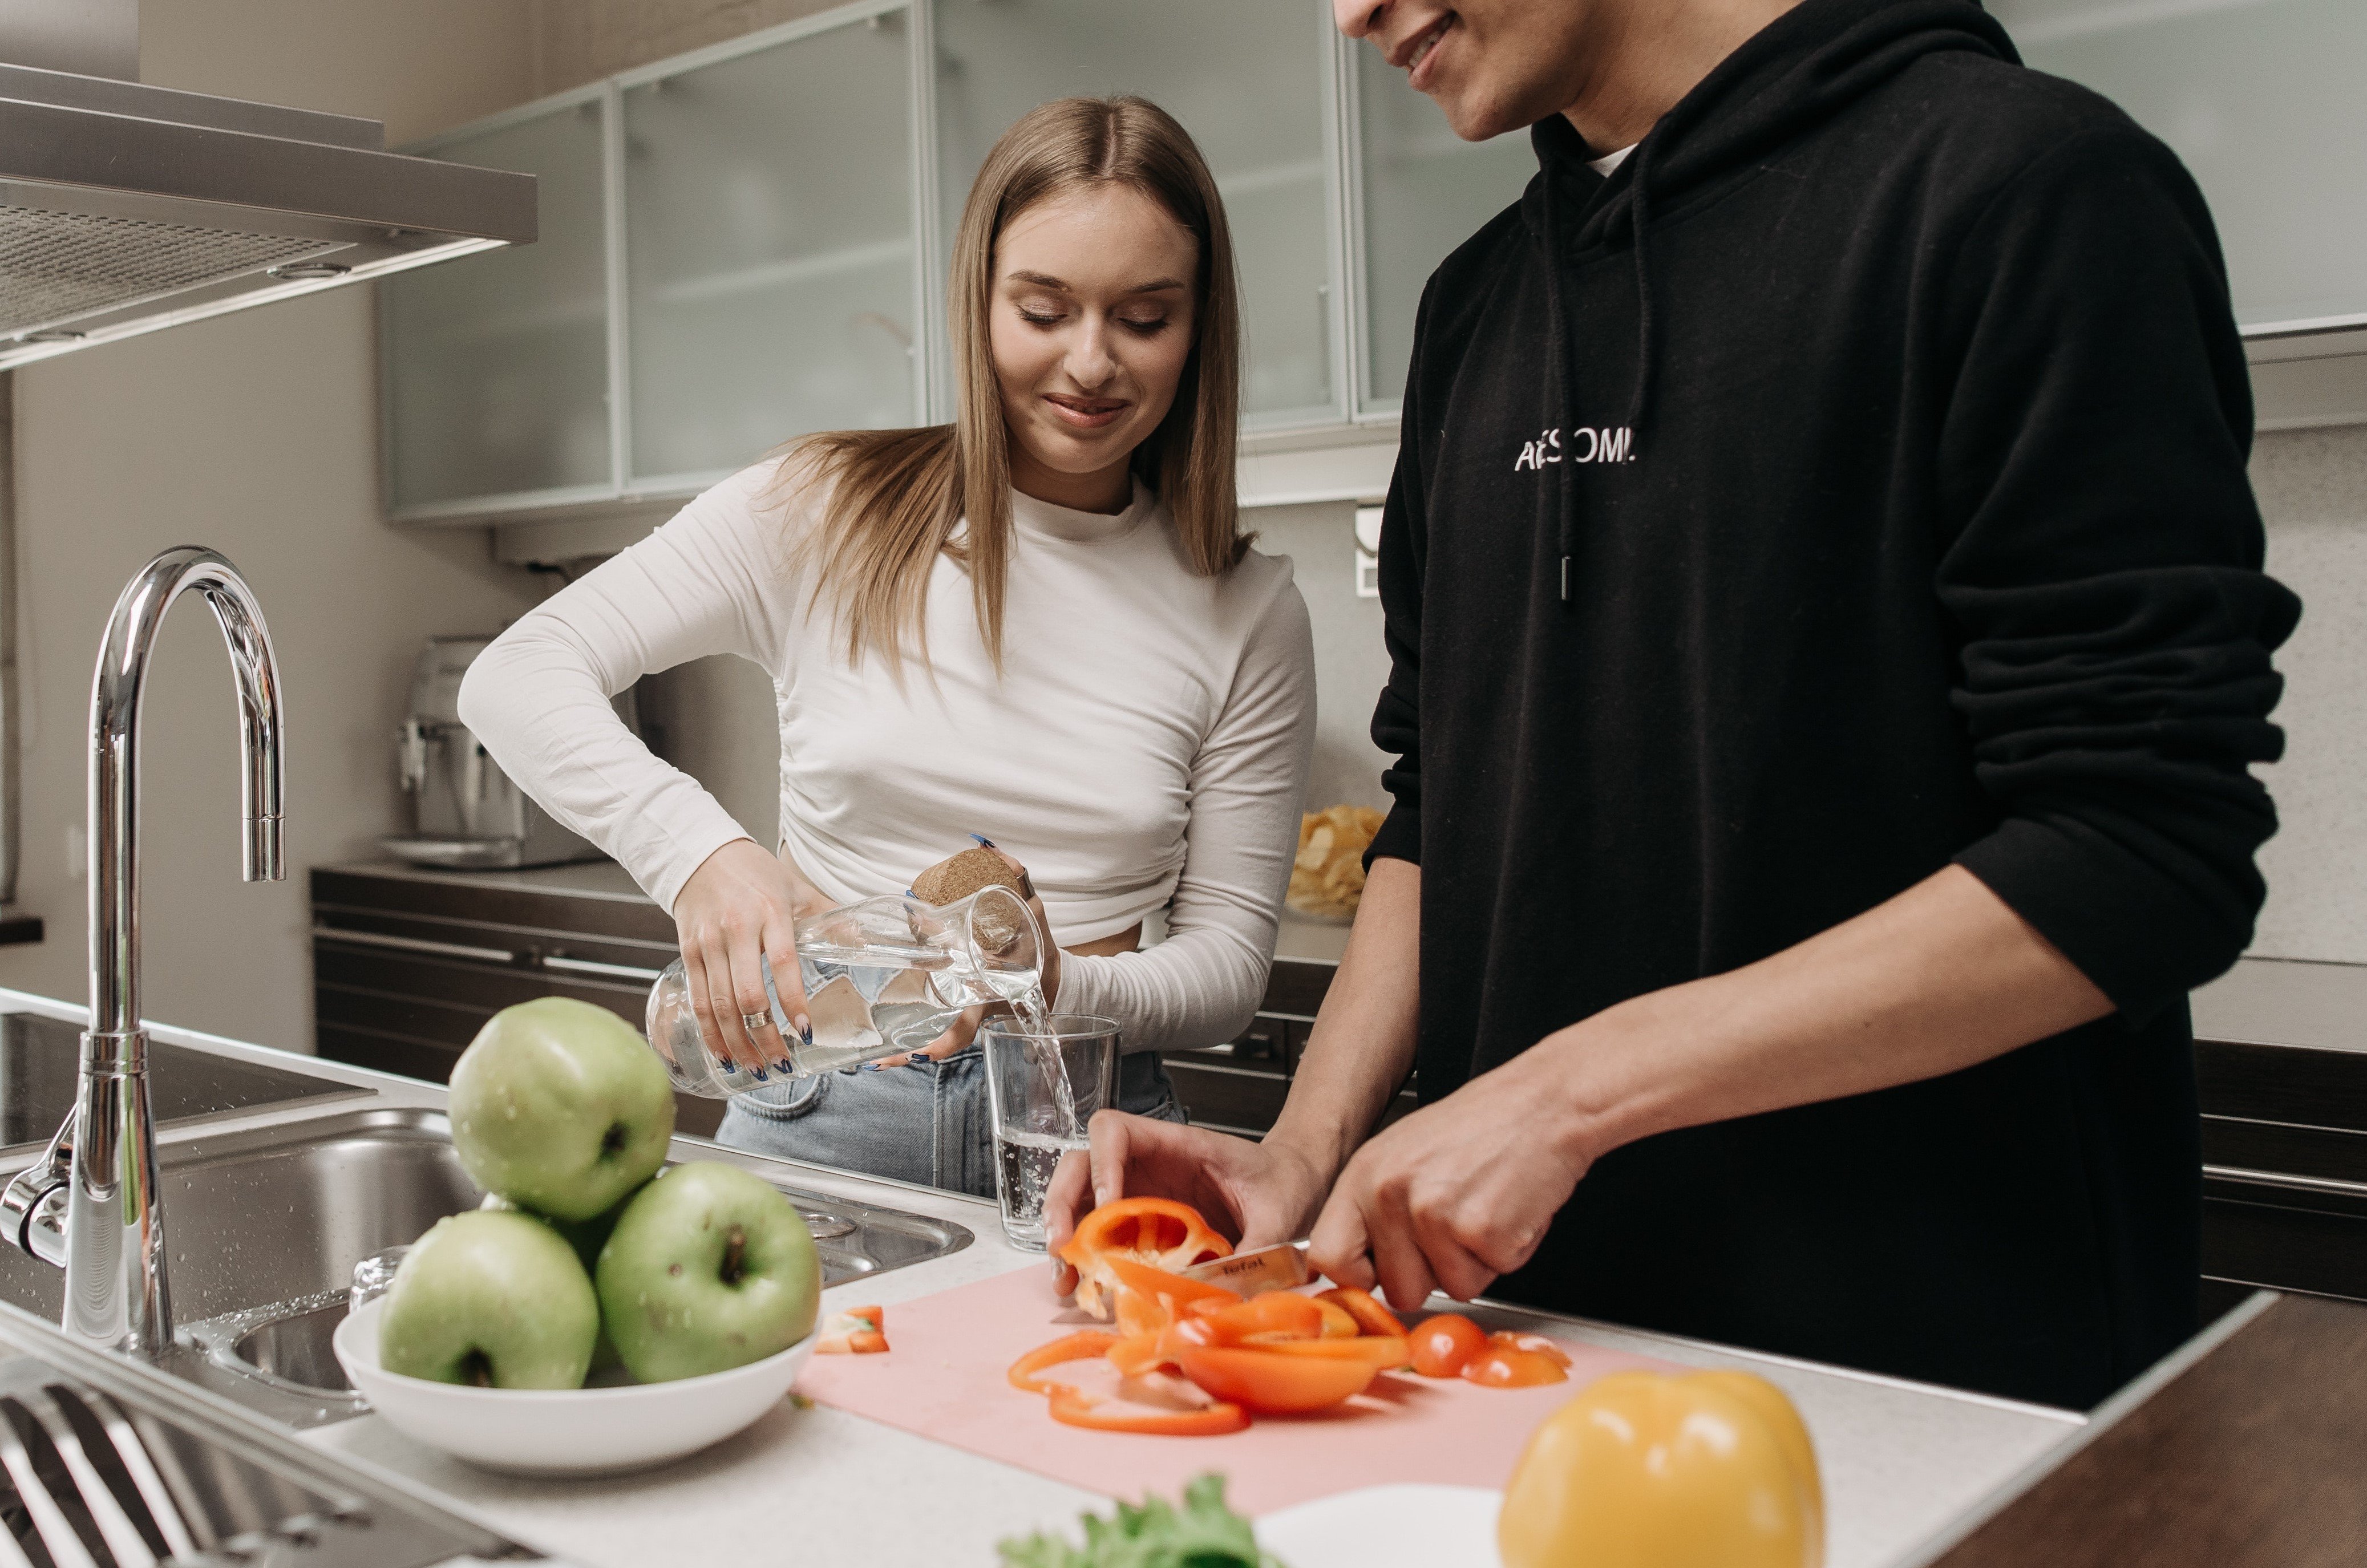 Things took a different turn when OP saw Stacy & his sister's boyfriend in the kitchen. | Source: Pexels